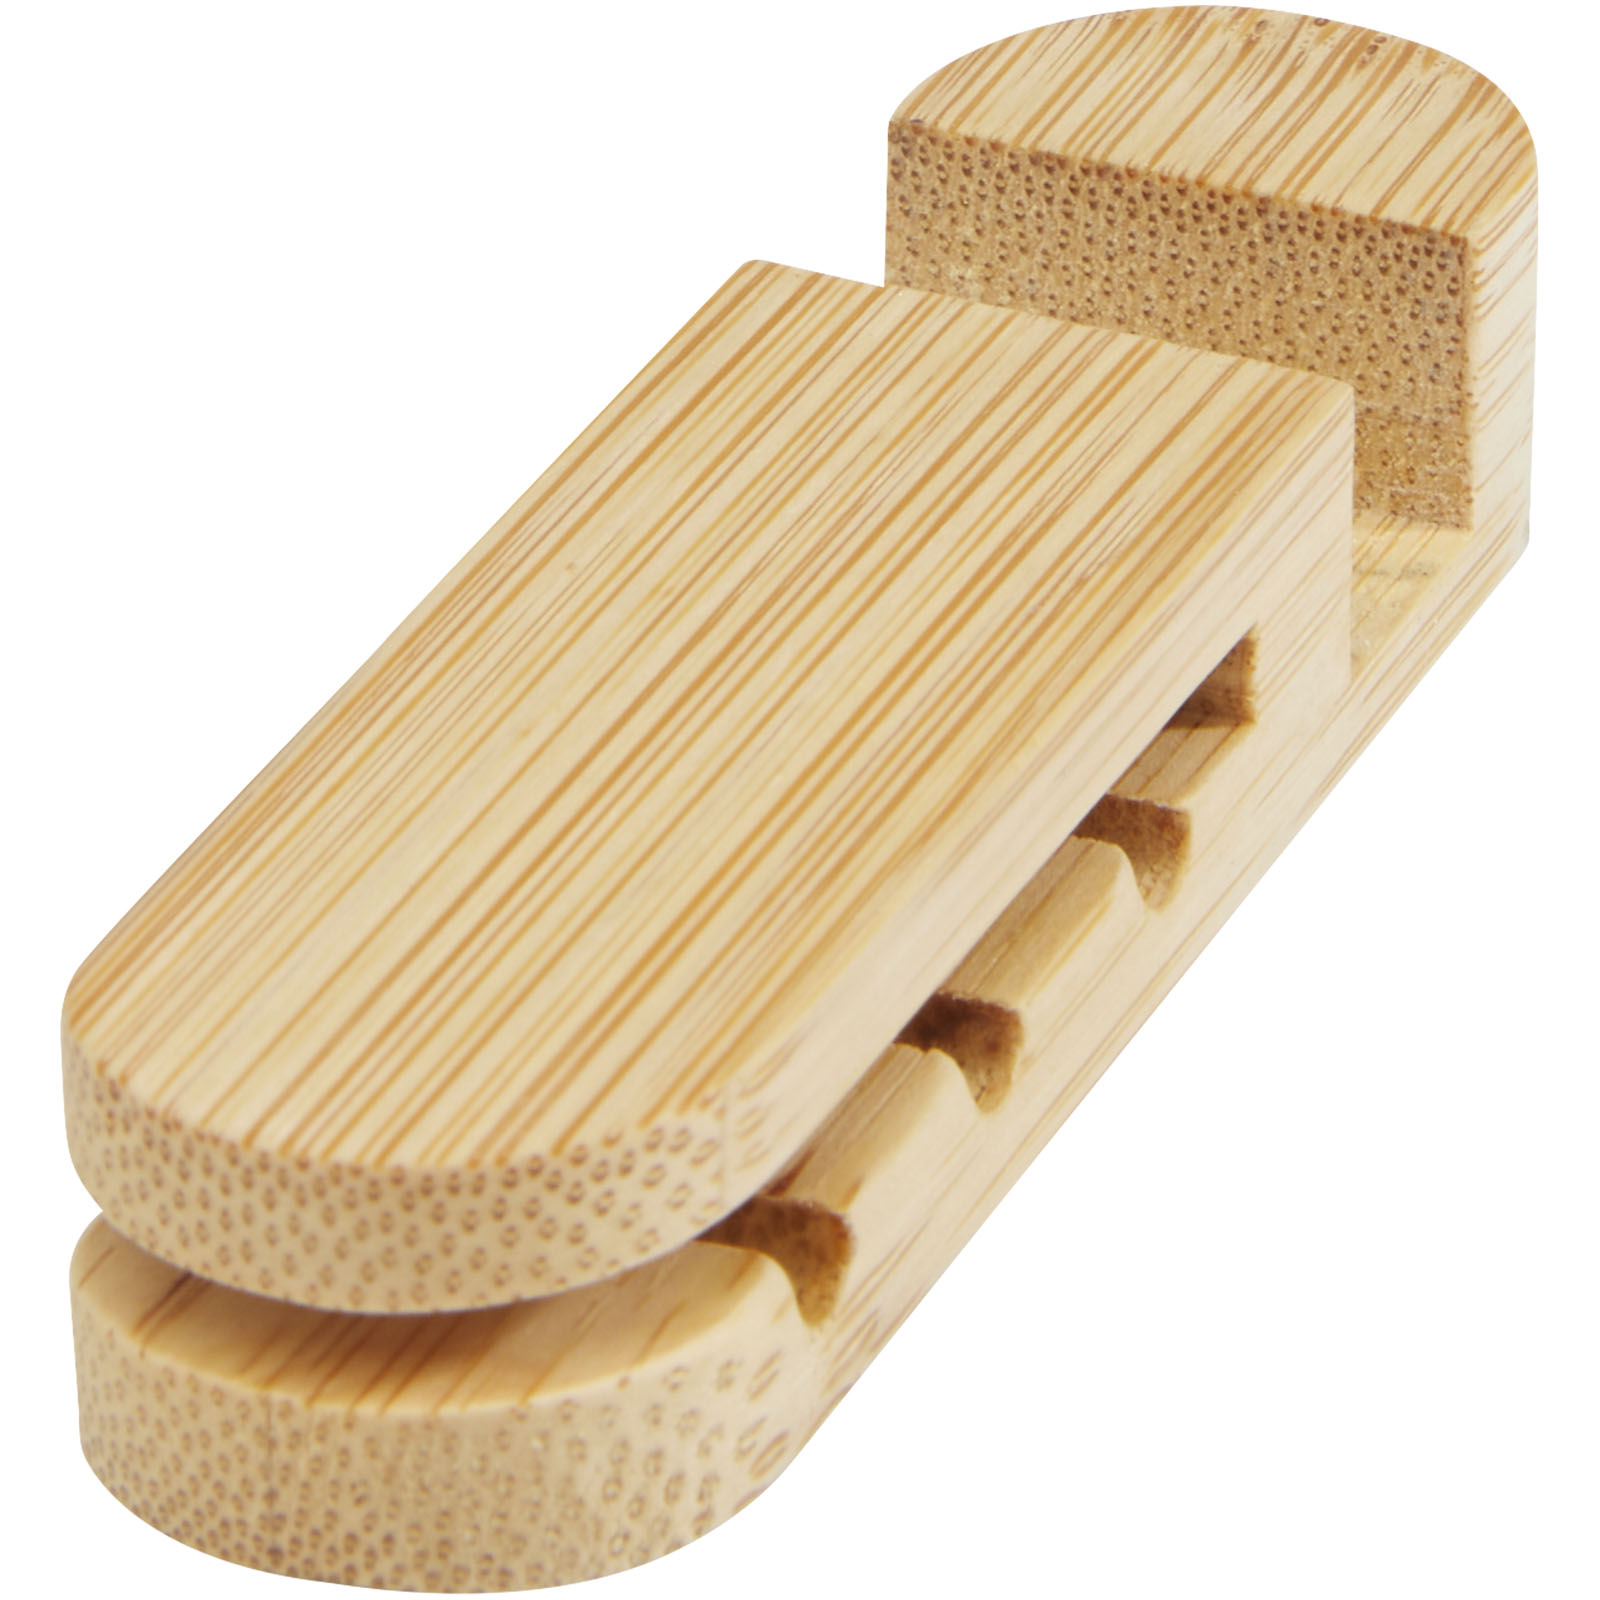 Advertising Telephone & Tablet Accessories - Edulis bamboo cable manager  - 3